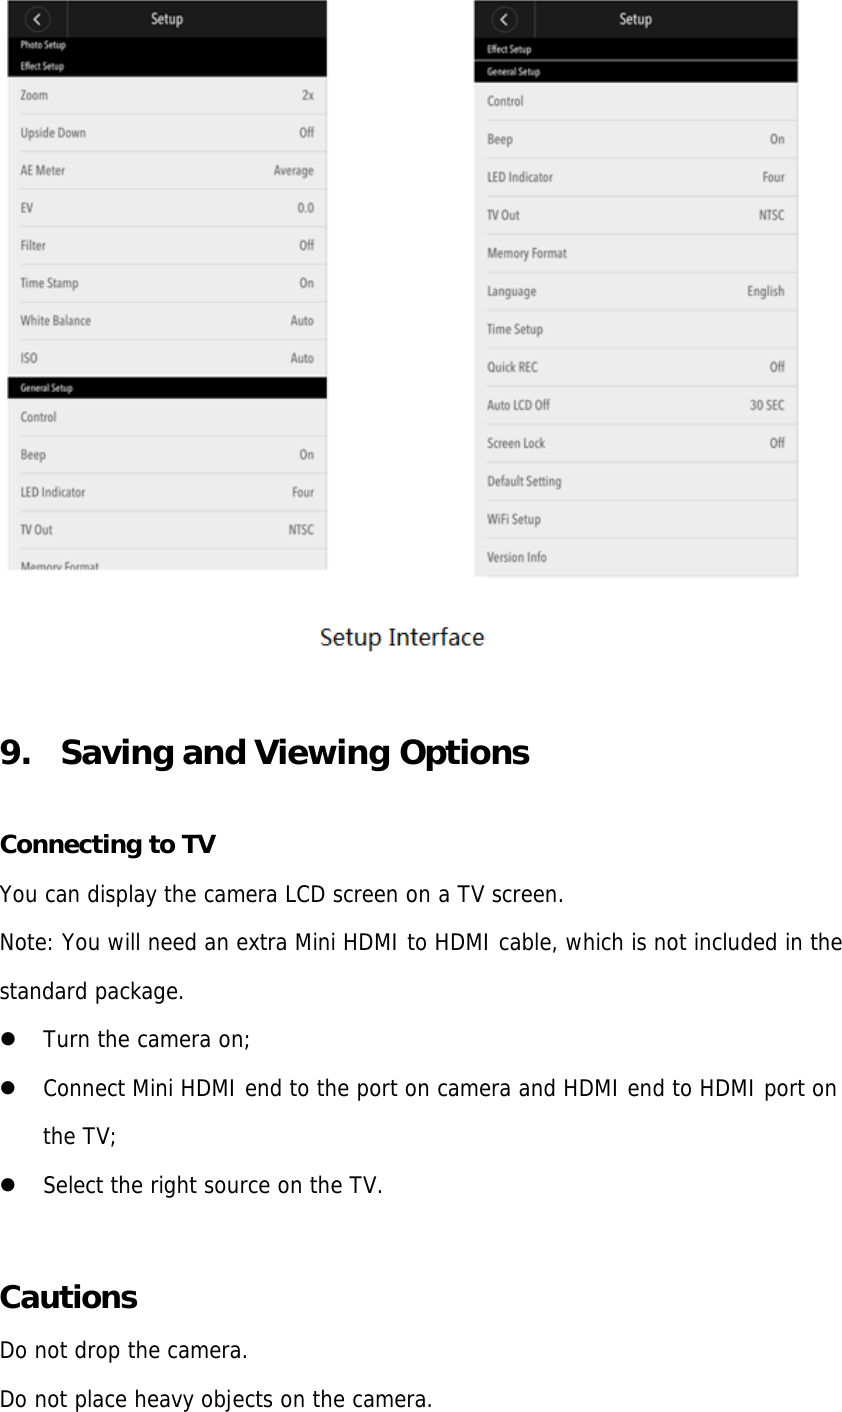 9. Saving and Viewing OptionsConnecting to TV You can display the camera LCD screen on a TV screen. Note: You will need an extra Mini HDMI to HDMI cable, which is not included in the standard package. Turn the camera on;Connect Mini HDMI end to the port on camera and HDMI end to HDMI port onthe TV;Select the right source on the TV.Cautions Do not drop the camera. Do not place heavy objects on the camera. 